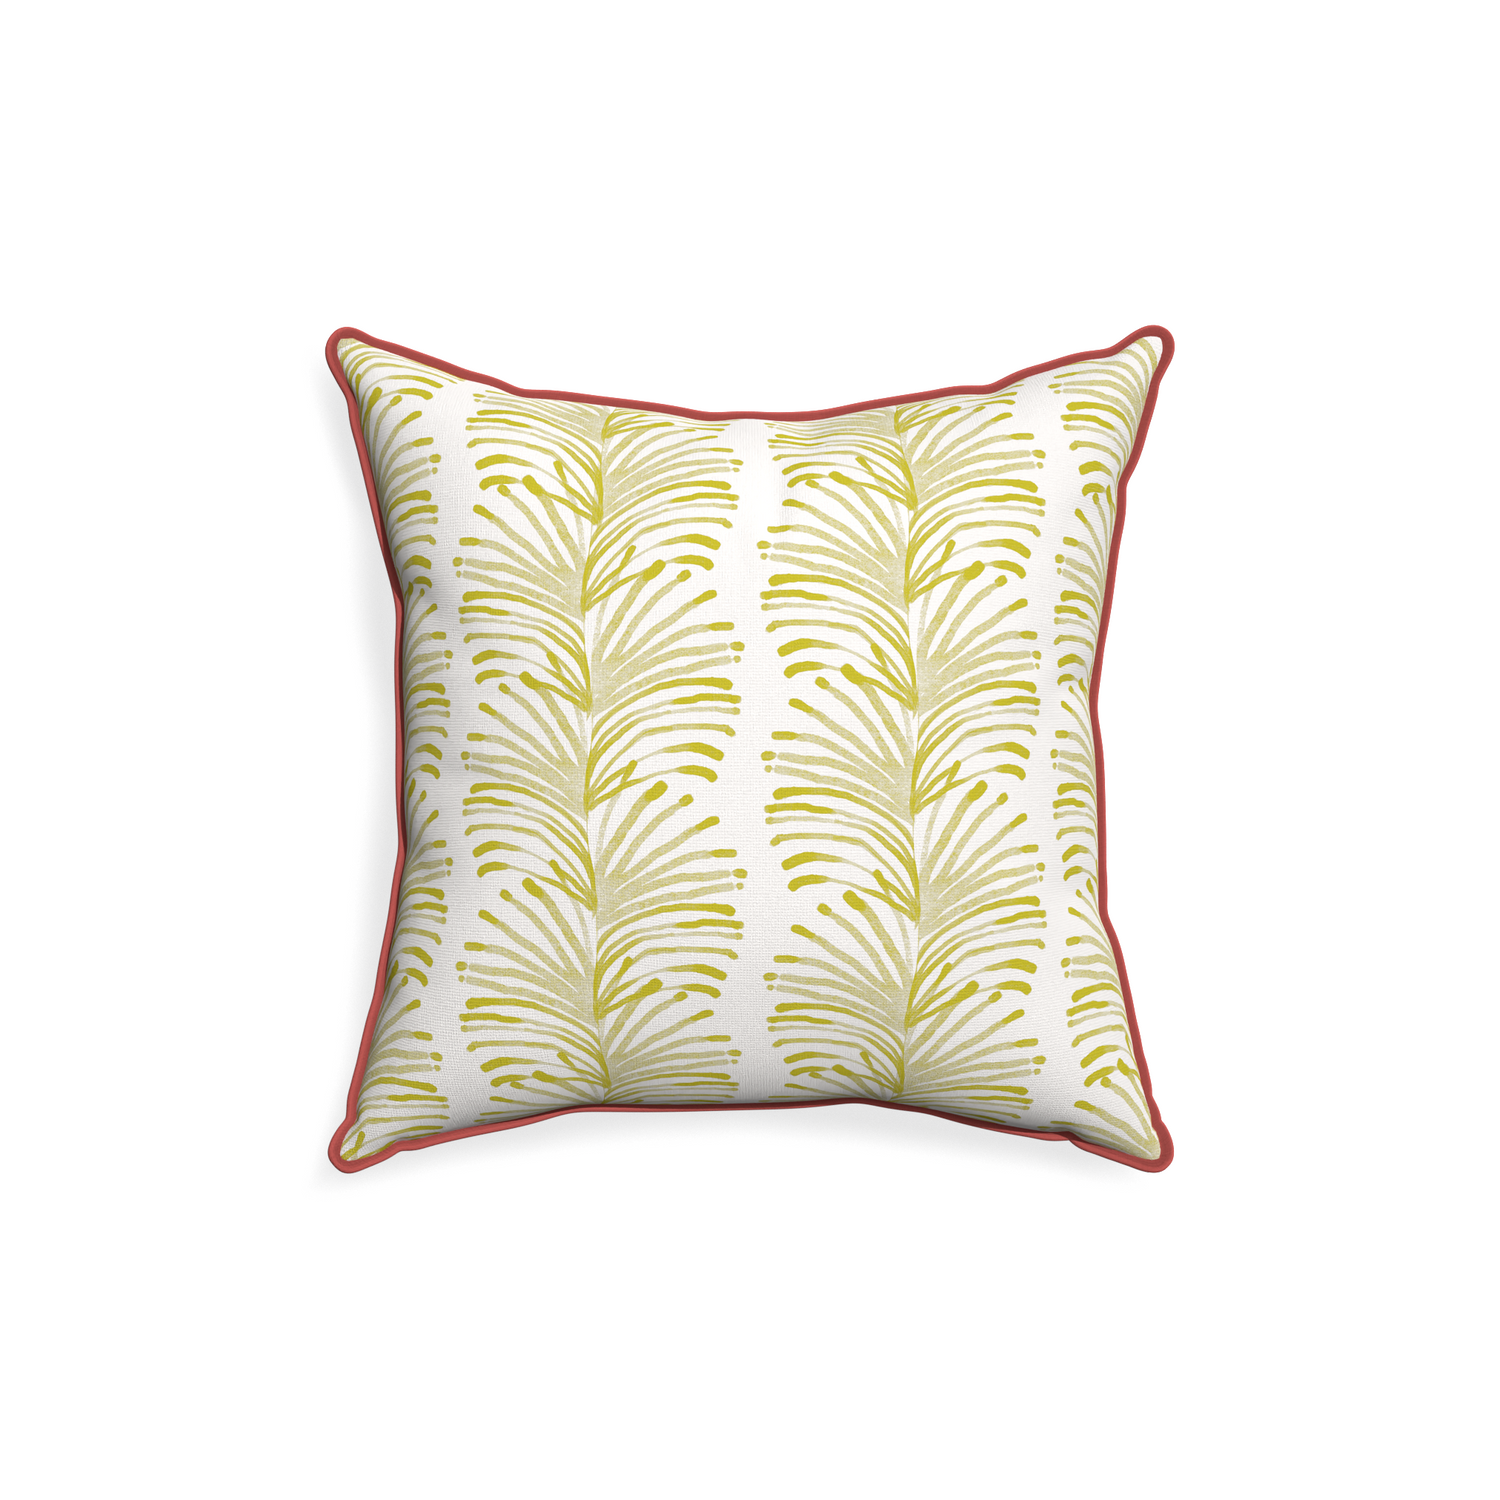 18-square emma chartreuse custom pillow with c piping on white background